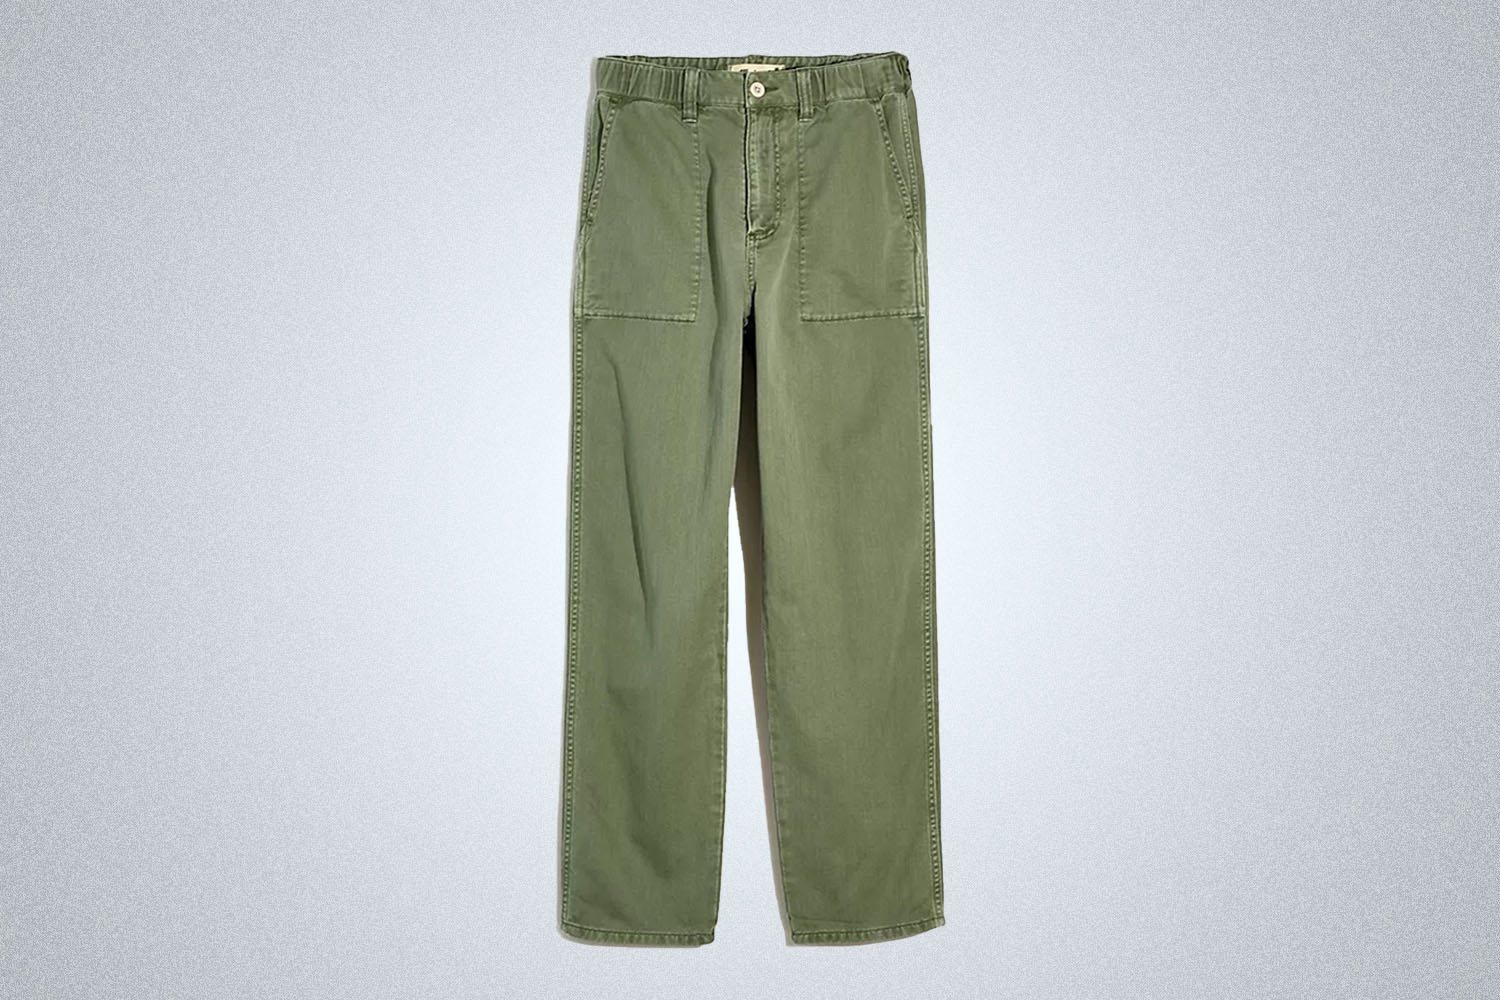 a pair of green chinos from Madewell on a grey background